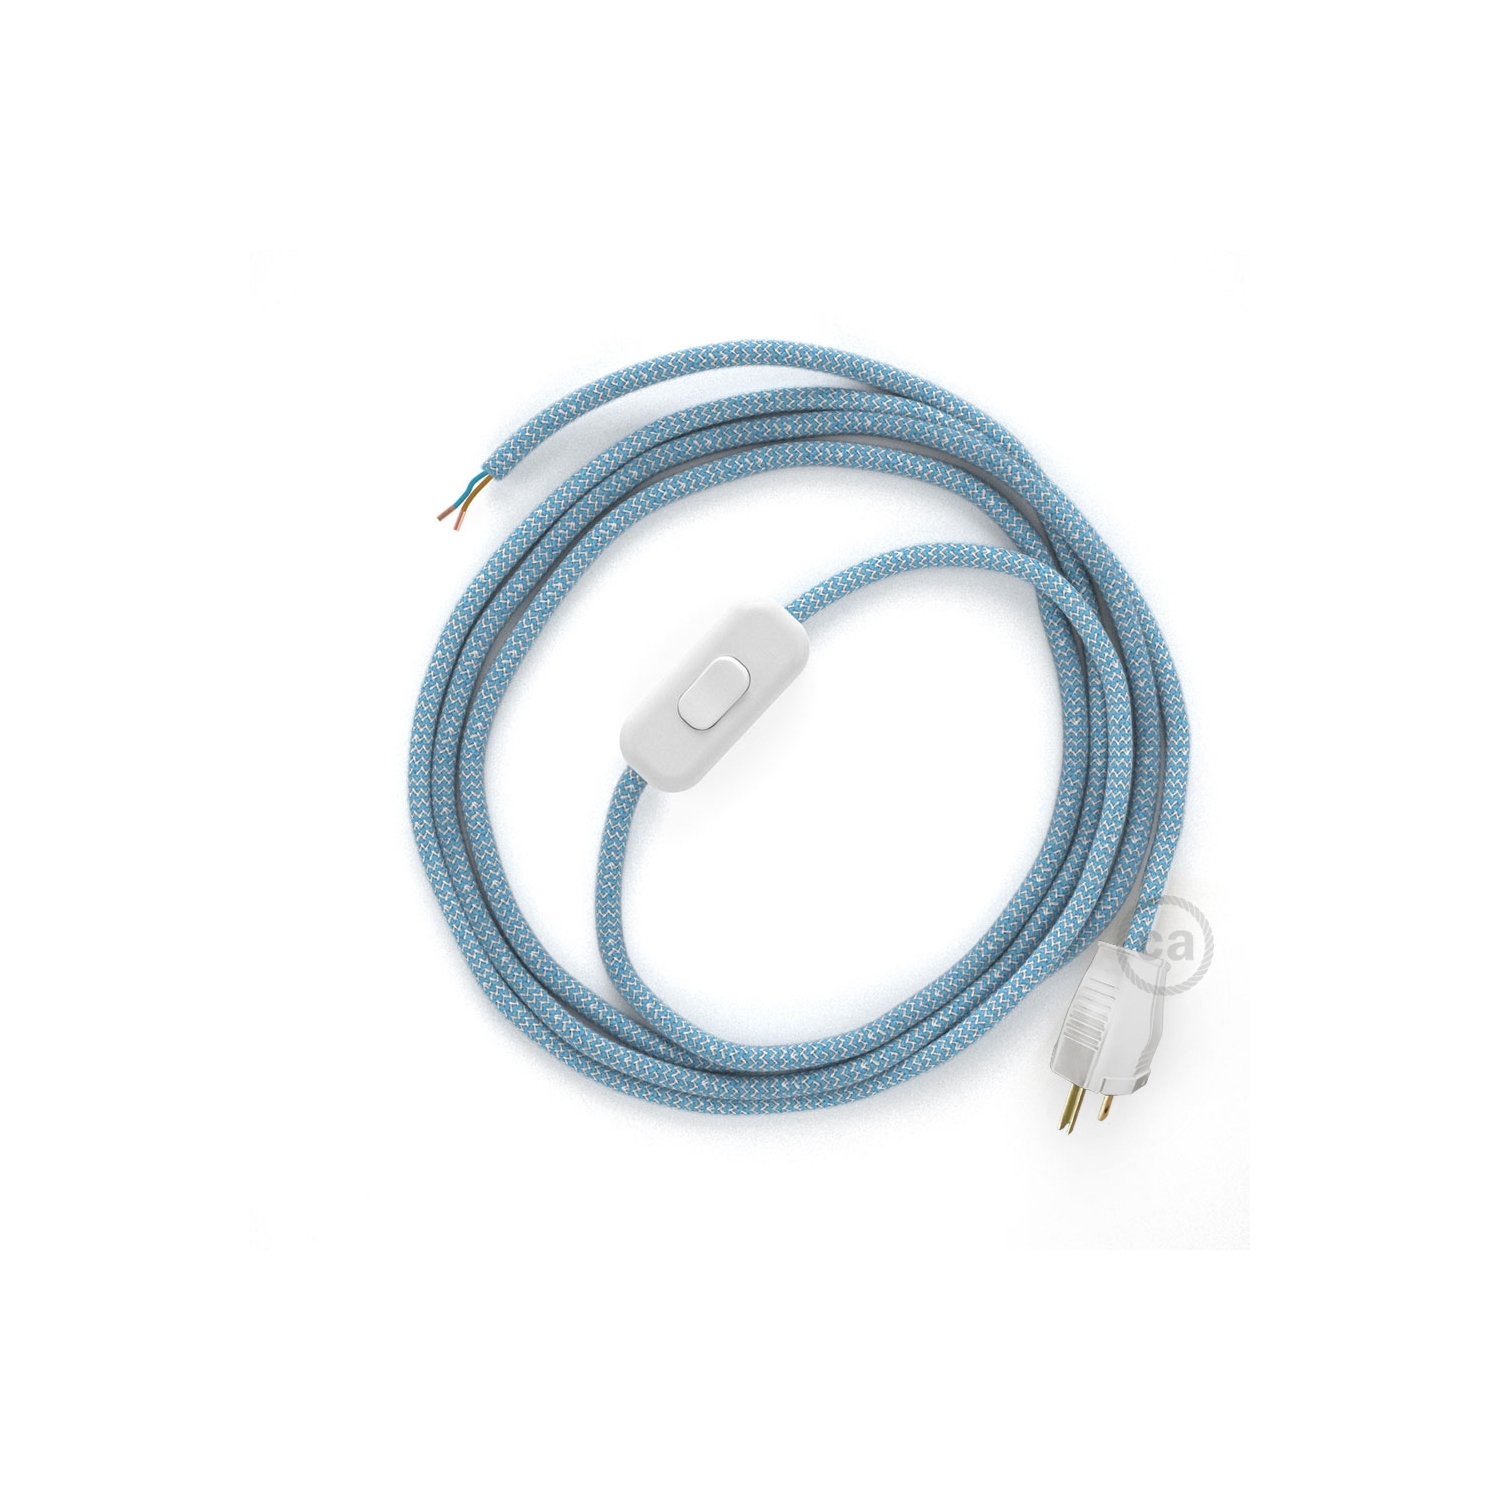 Power Cord with in-line switch, RD75 Natural & Blue Linen Chevron - Choose color of switch/plug